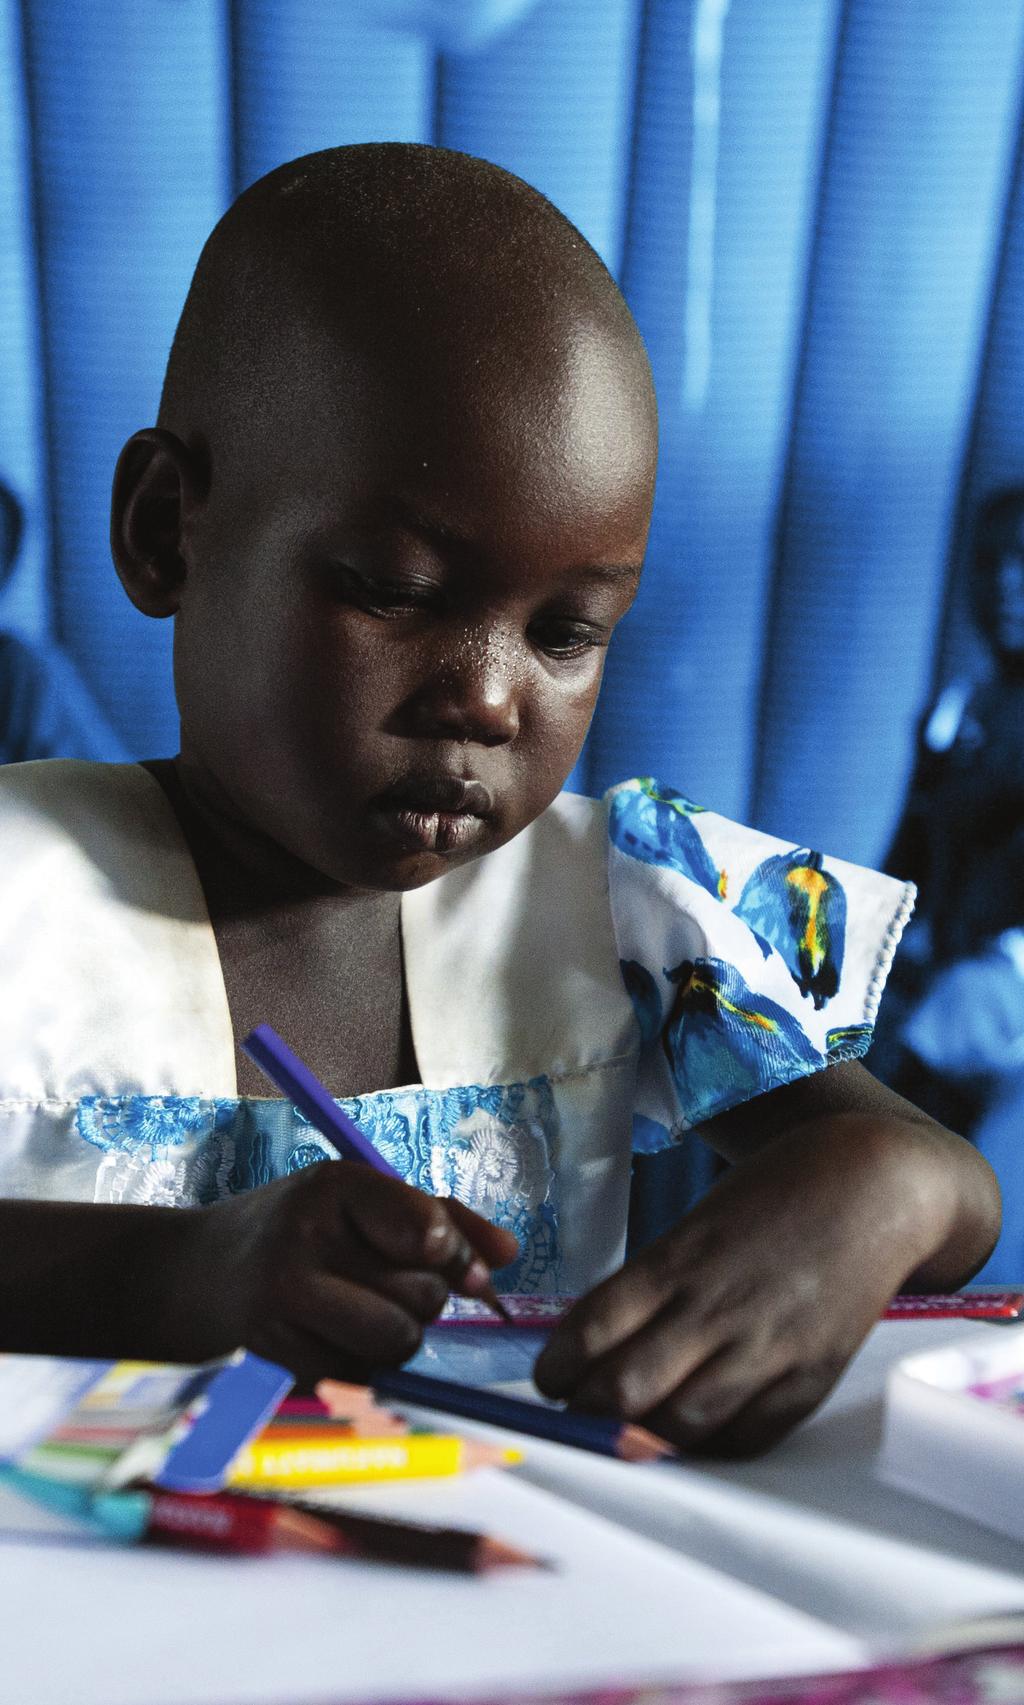 Four-year-old Nyajime Guet was suffering from severe acute malnutrition (SAM) when she was admitted to a UNICEF-supported clinic a in Juba, South Sudan.